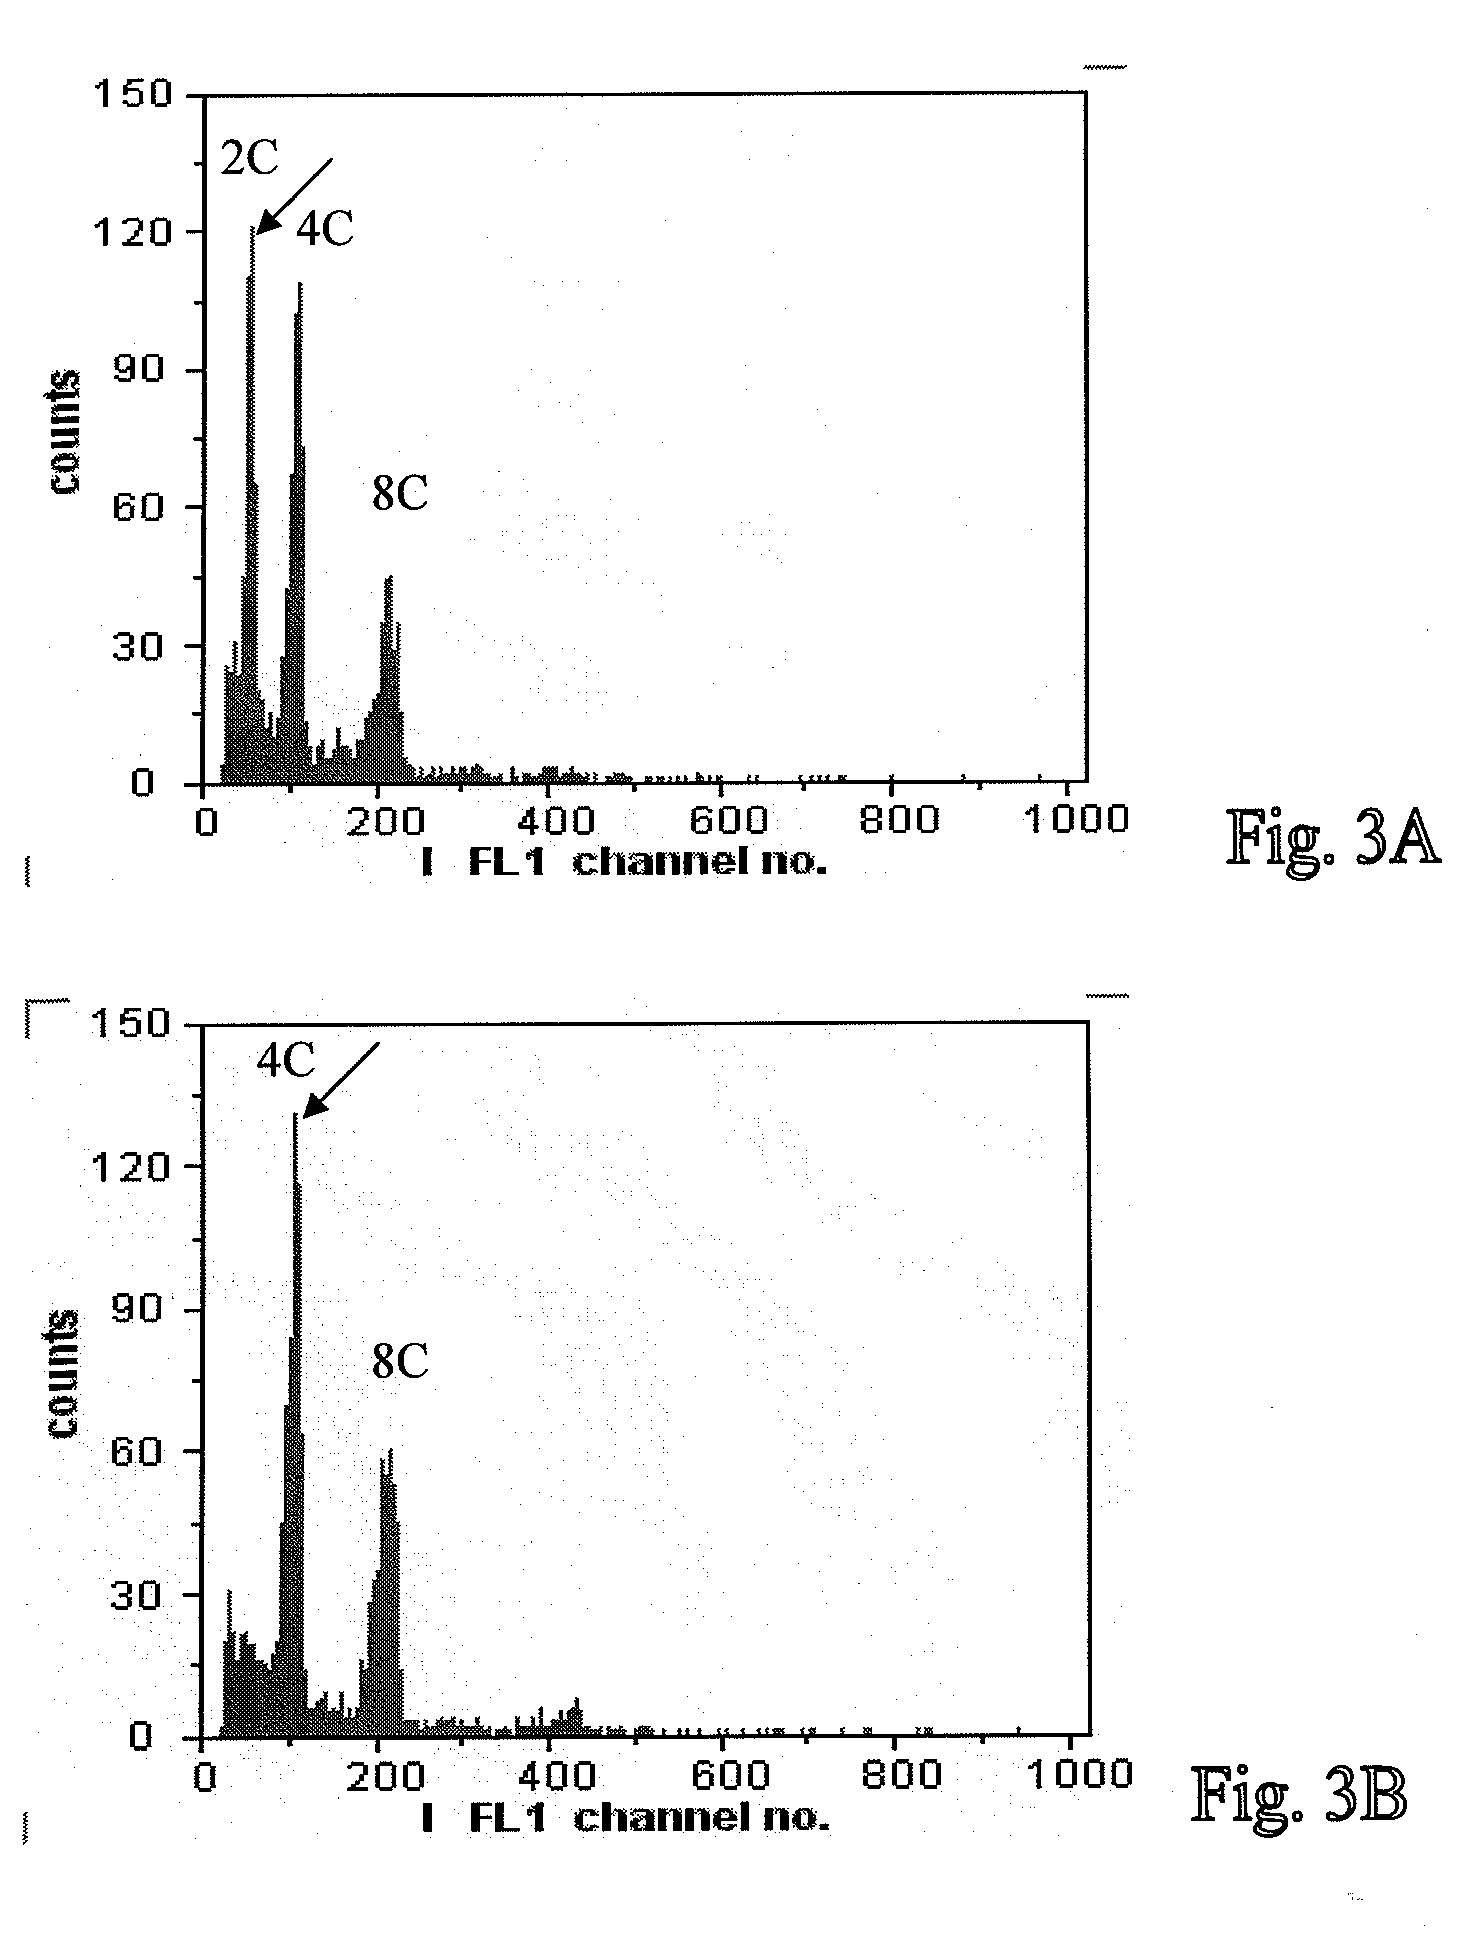 Method for Producing Polyploid Plants of Orchids